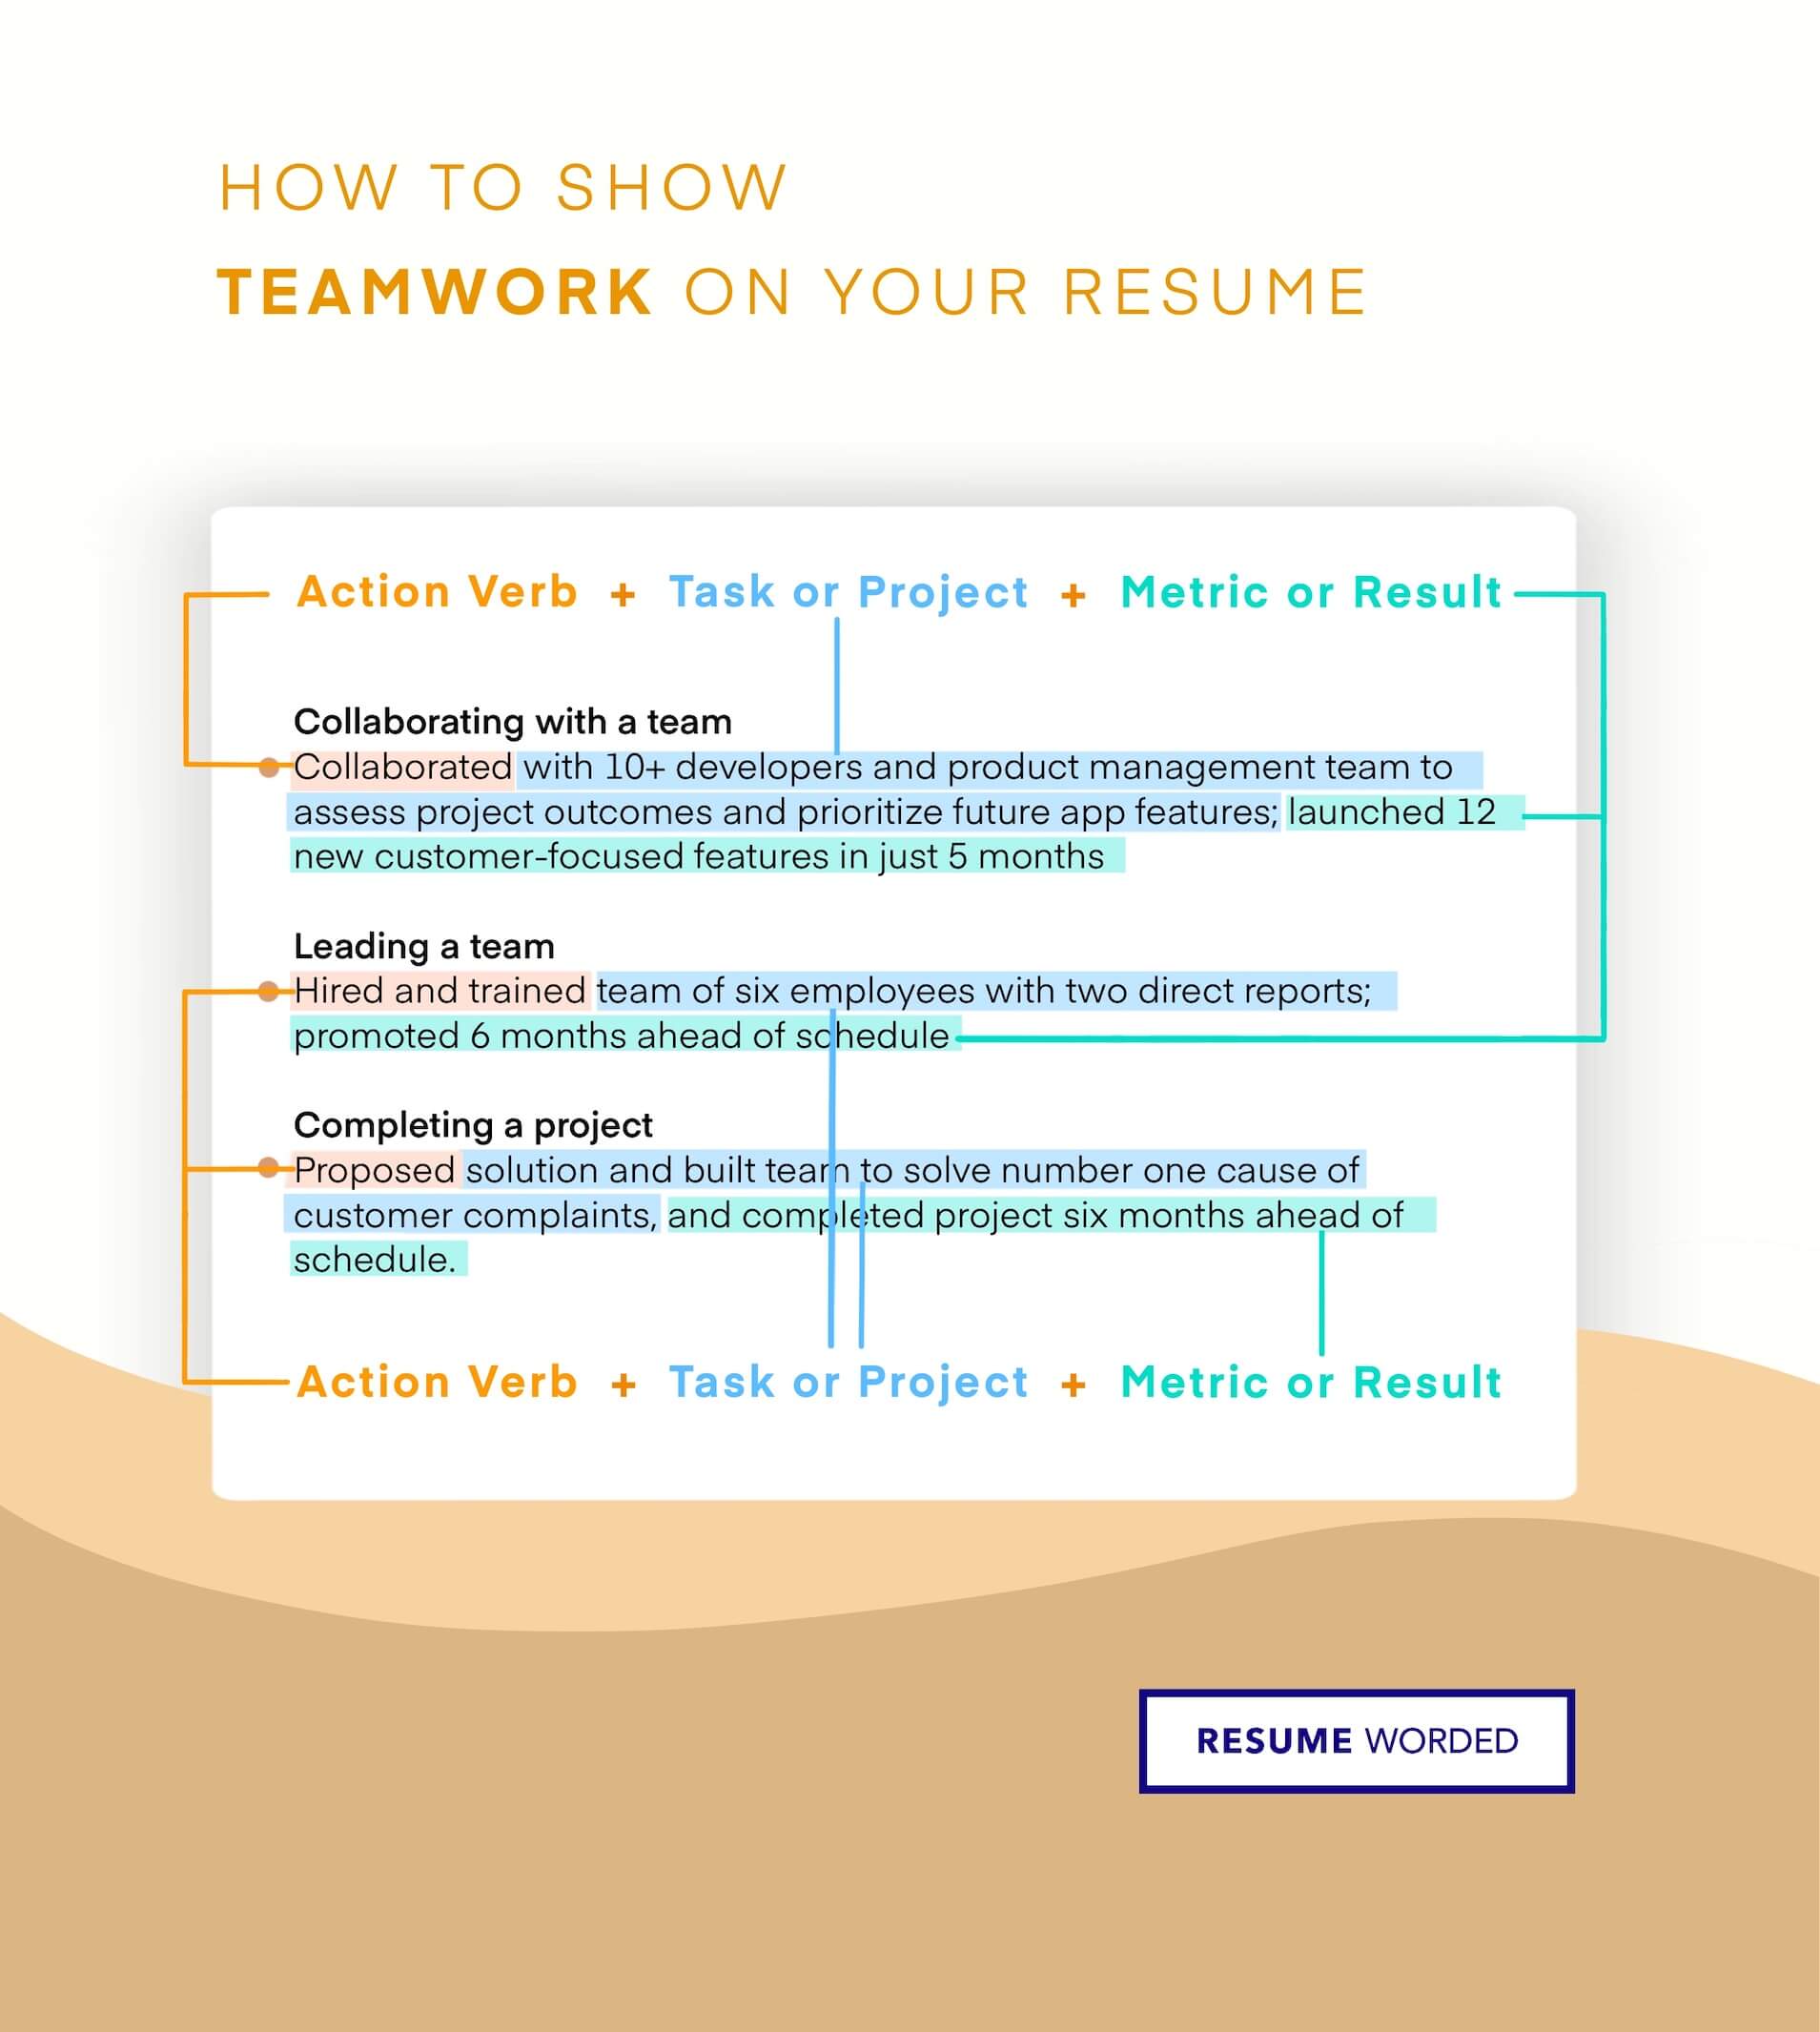 Mention your ability to work with a remote team. - Ecommerce Business Owner Resume